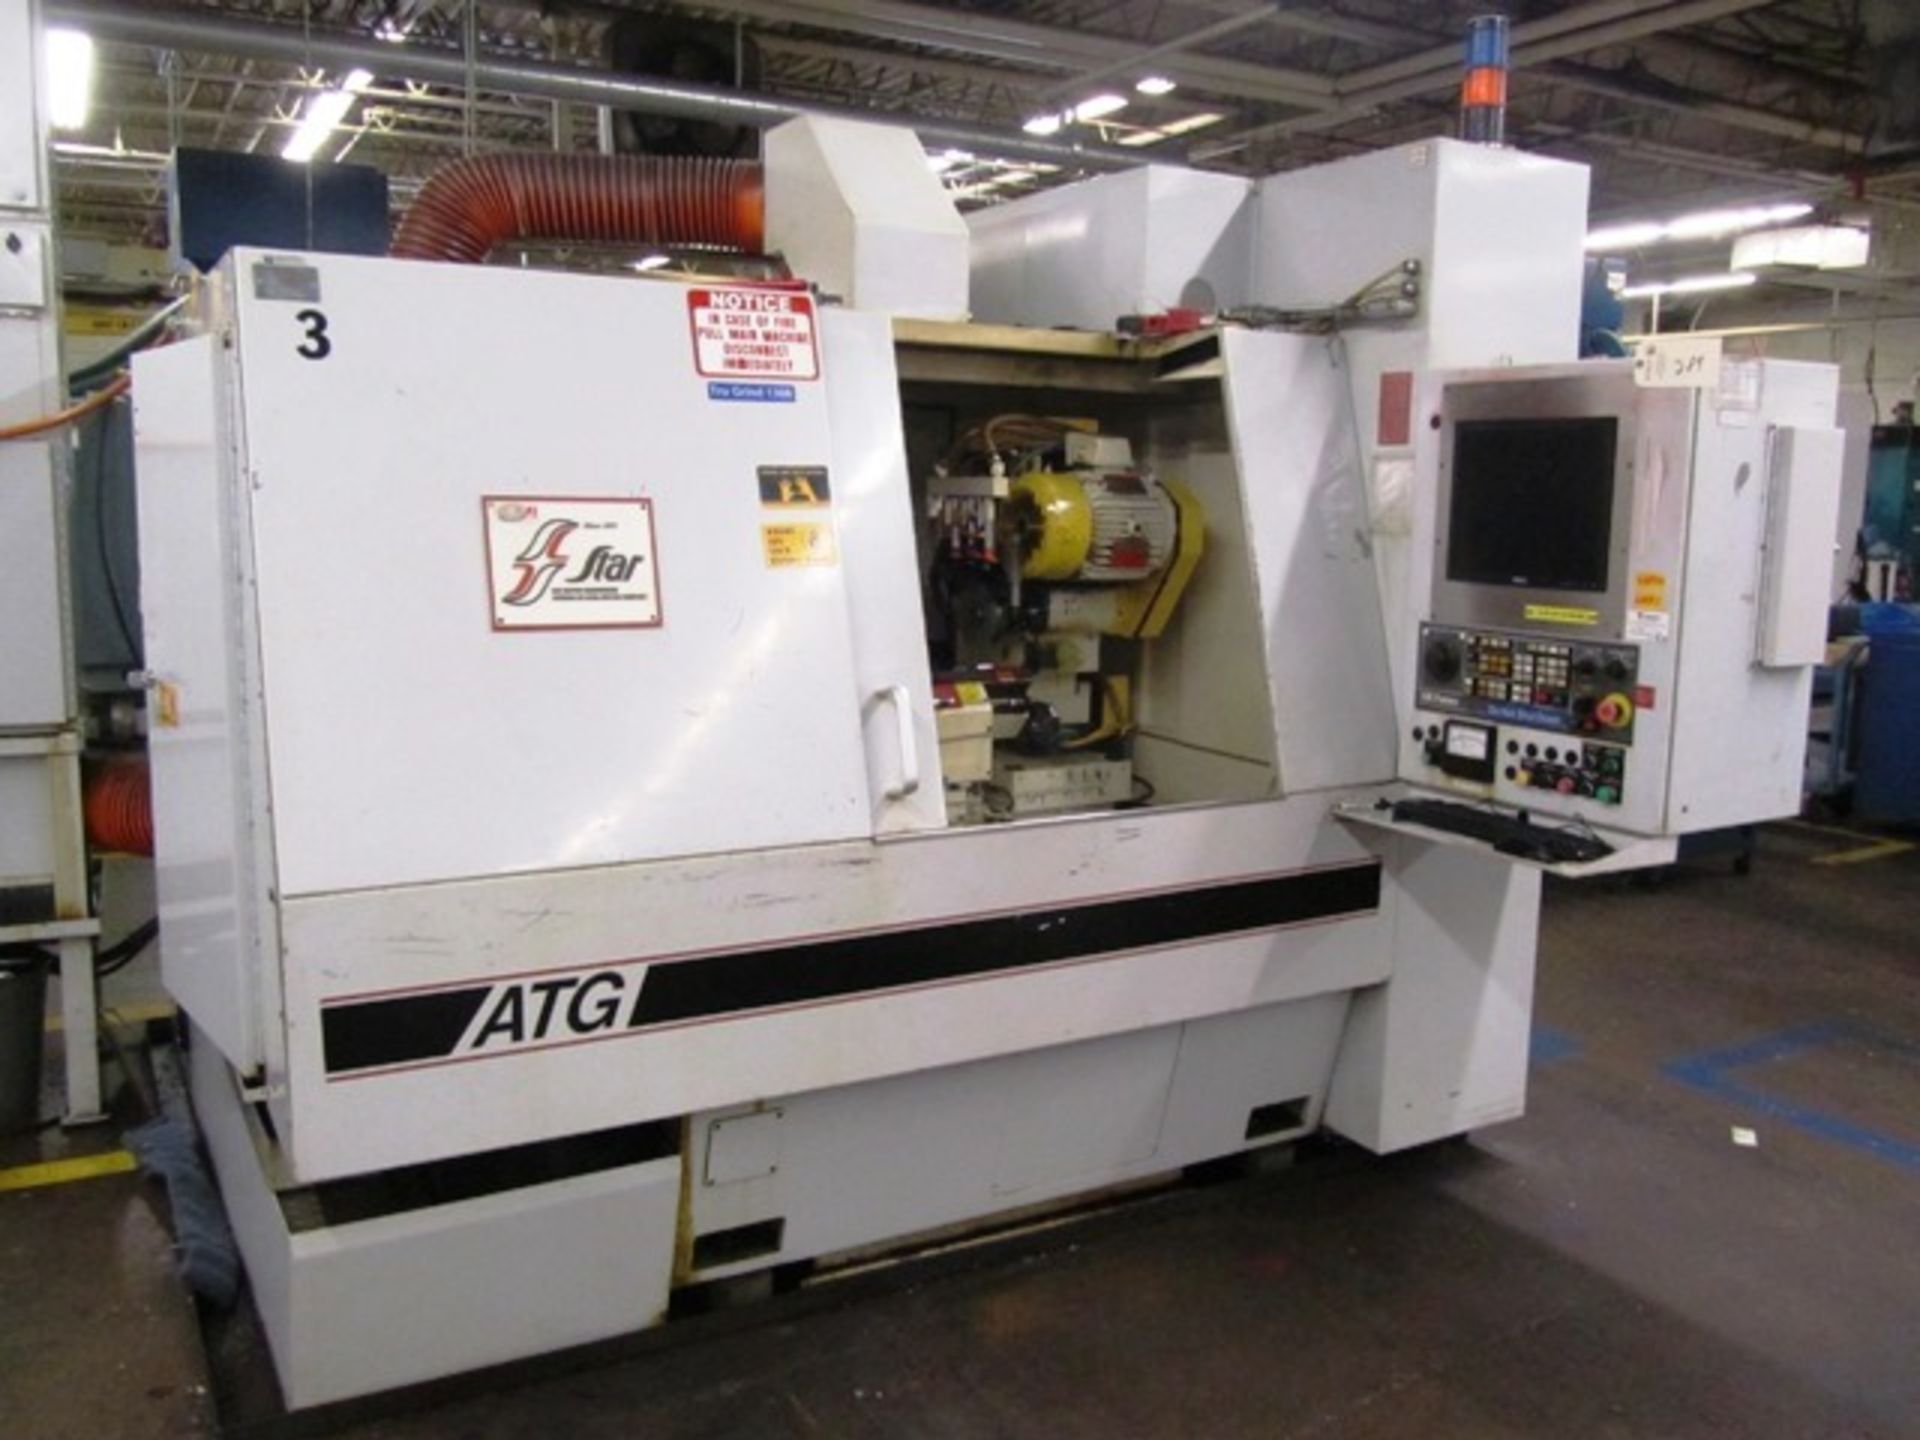 Star Model ATG-6AC 6 Axis (Approx.) CNC Tool & Cutter Grinder with Full Enclosure, Fanuc 15M CNC